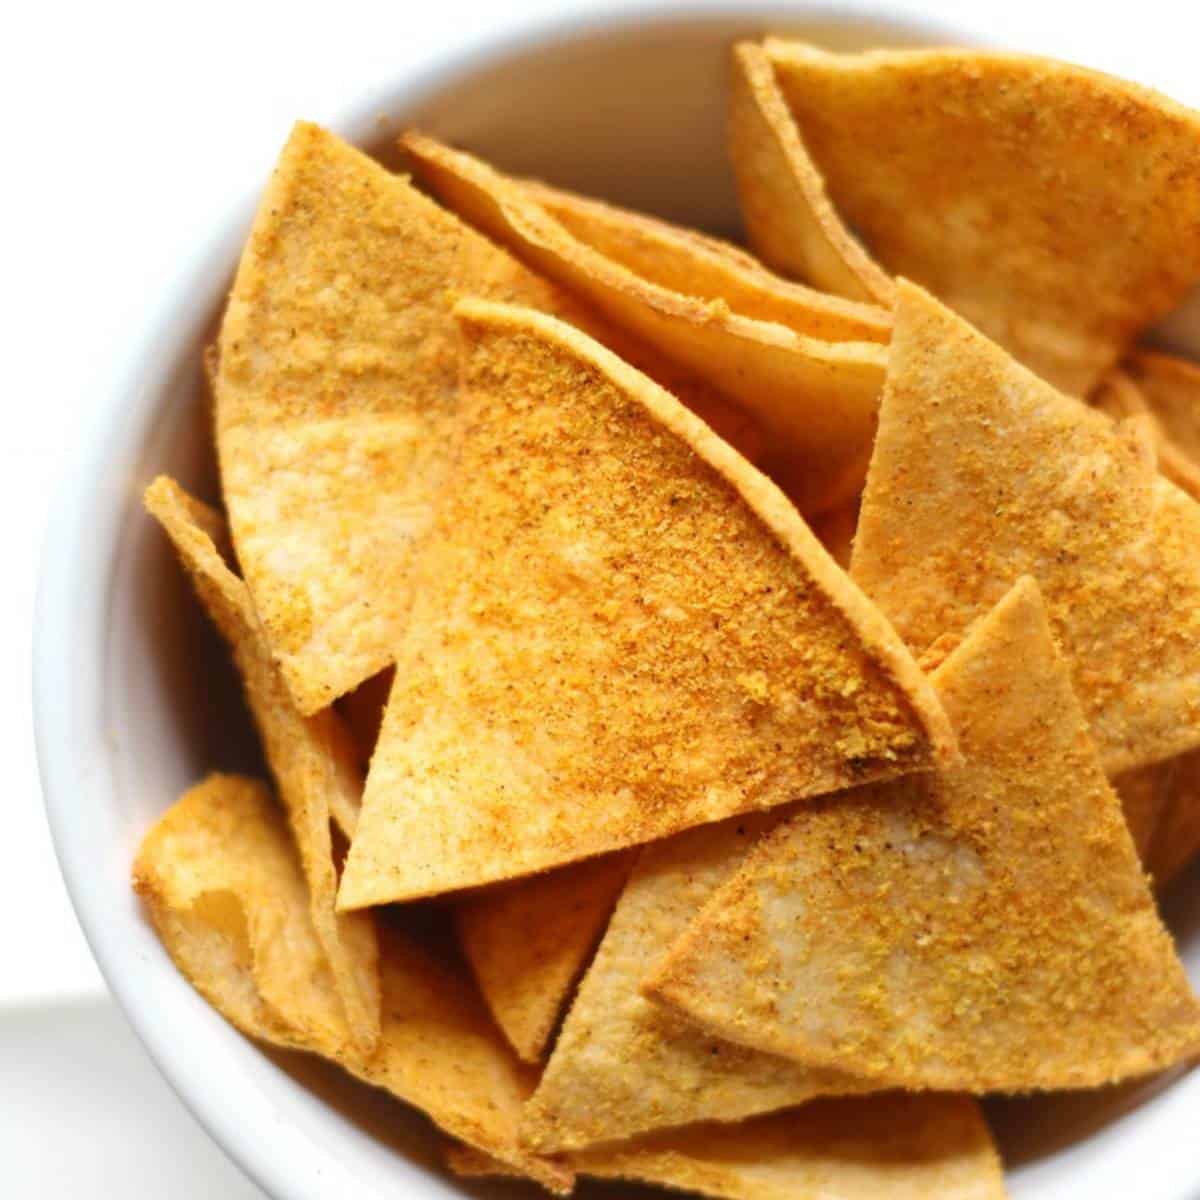 tortilla chips dusted with seasoning.